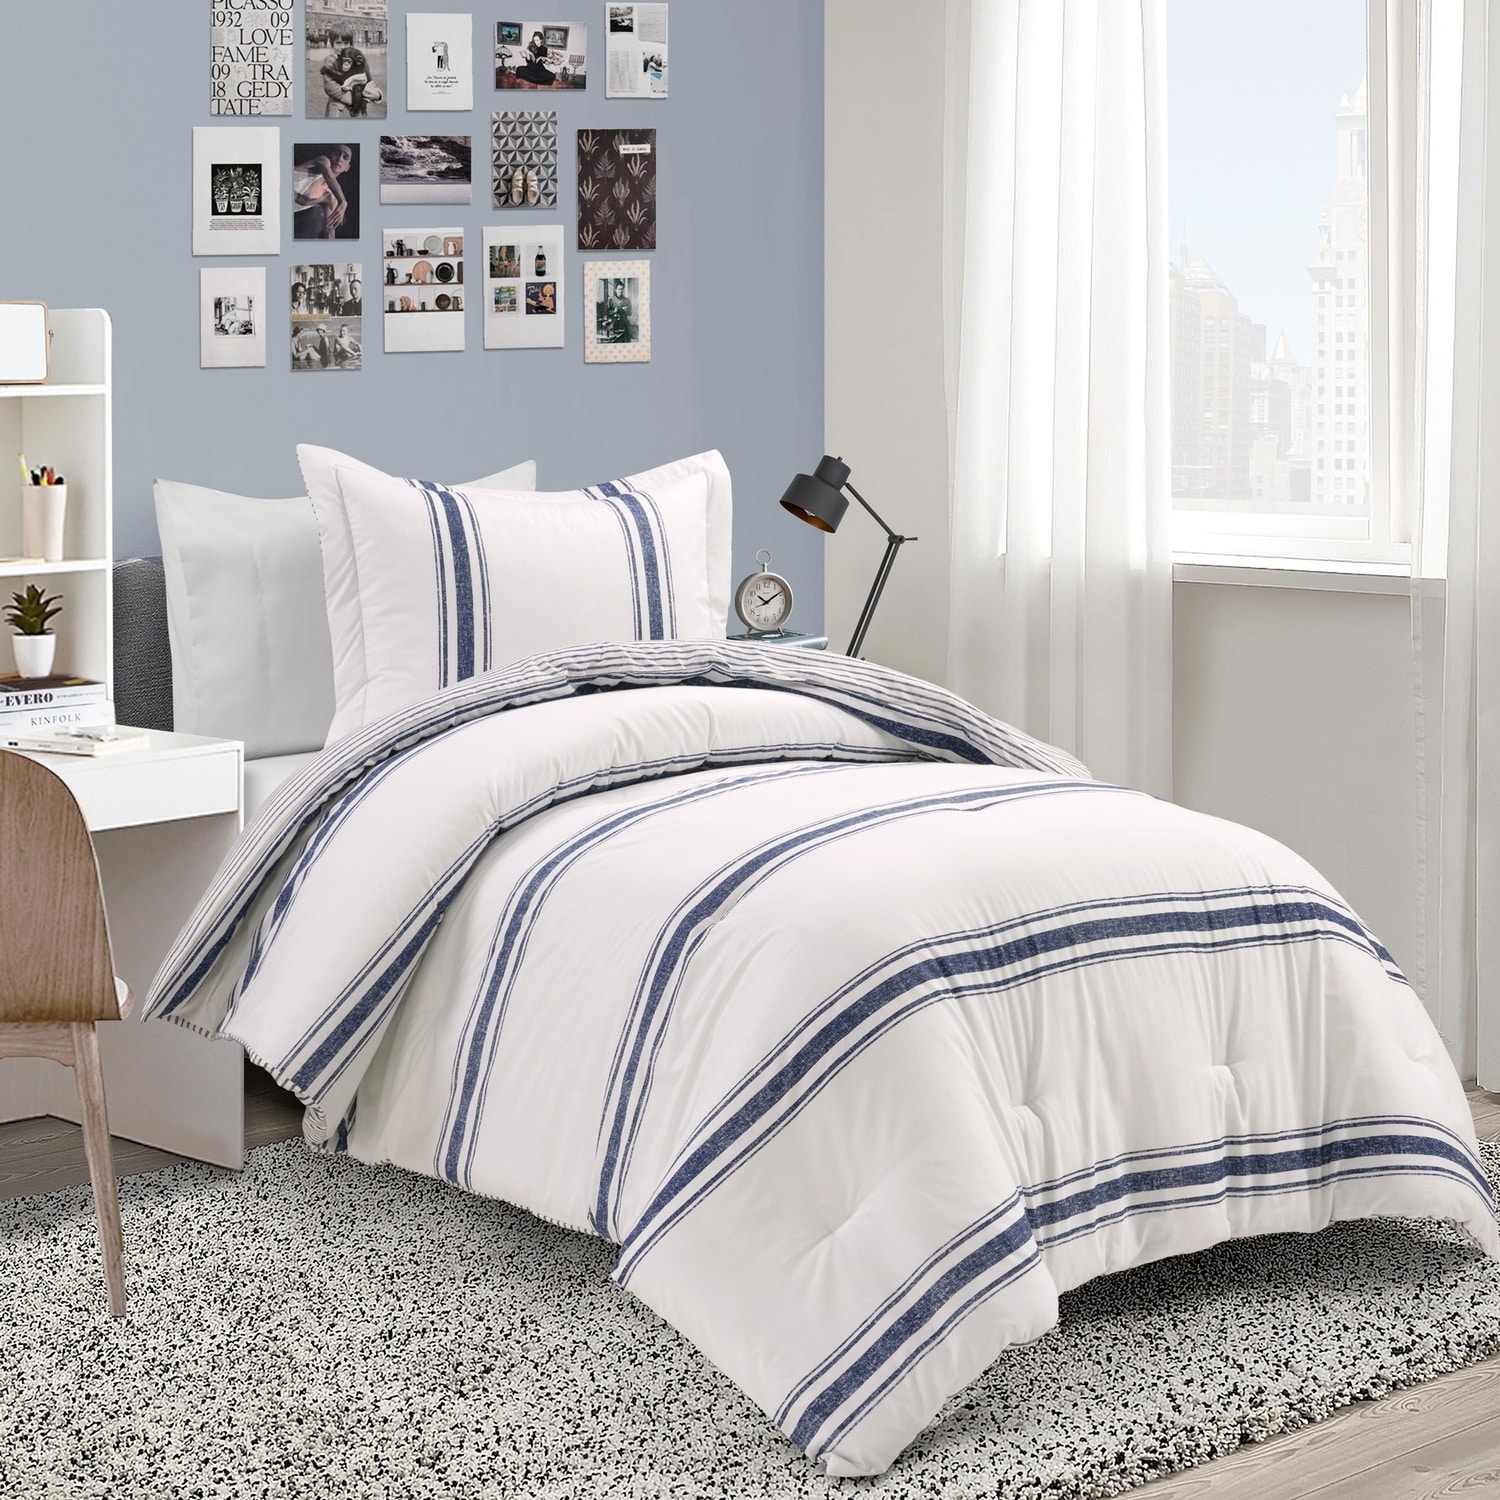 68 Inch Wide Comforters & Bedspreads at Lowes.com